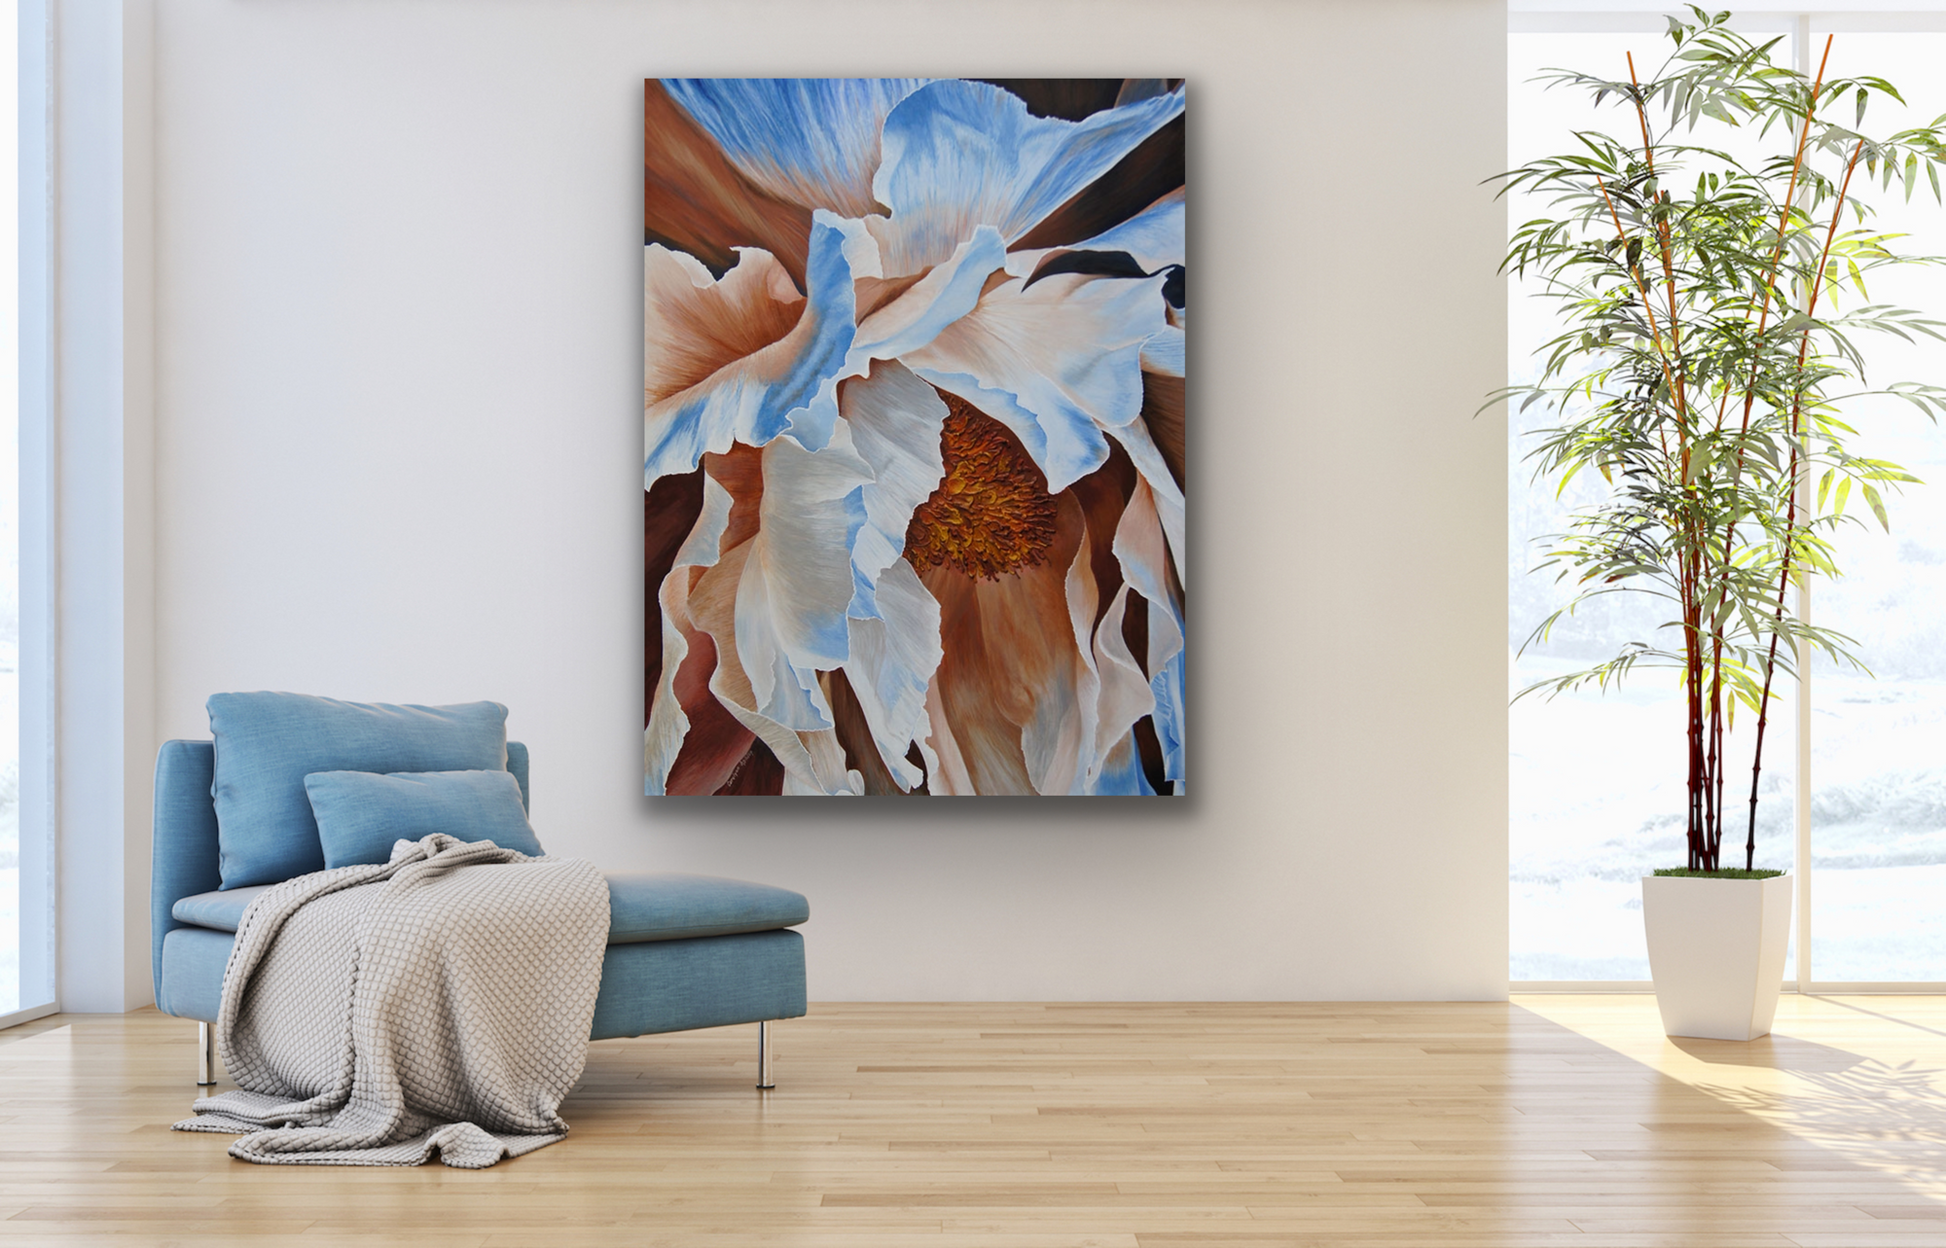 "Delicate" work of art with its blue and brown colours will suit a wide range of home decors and styles.